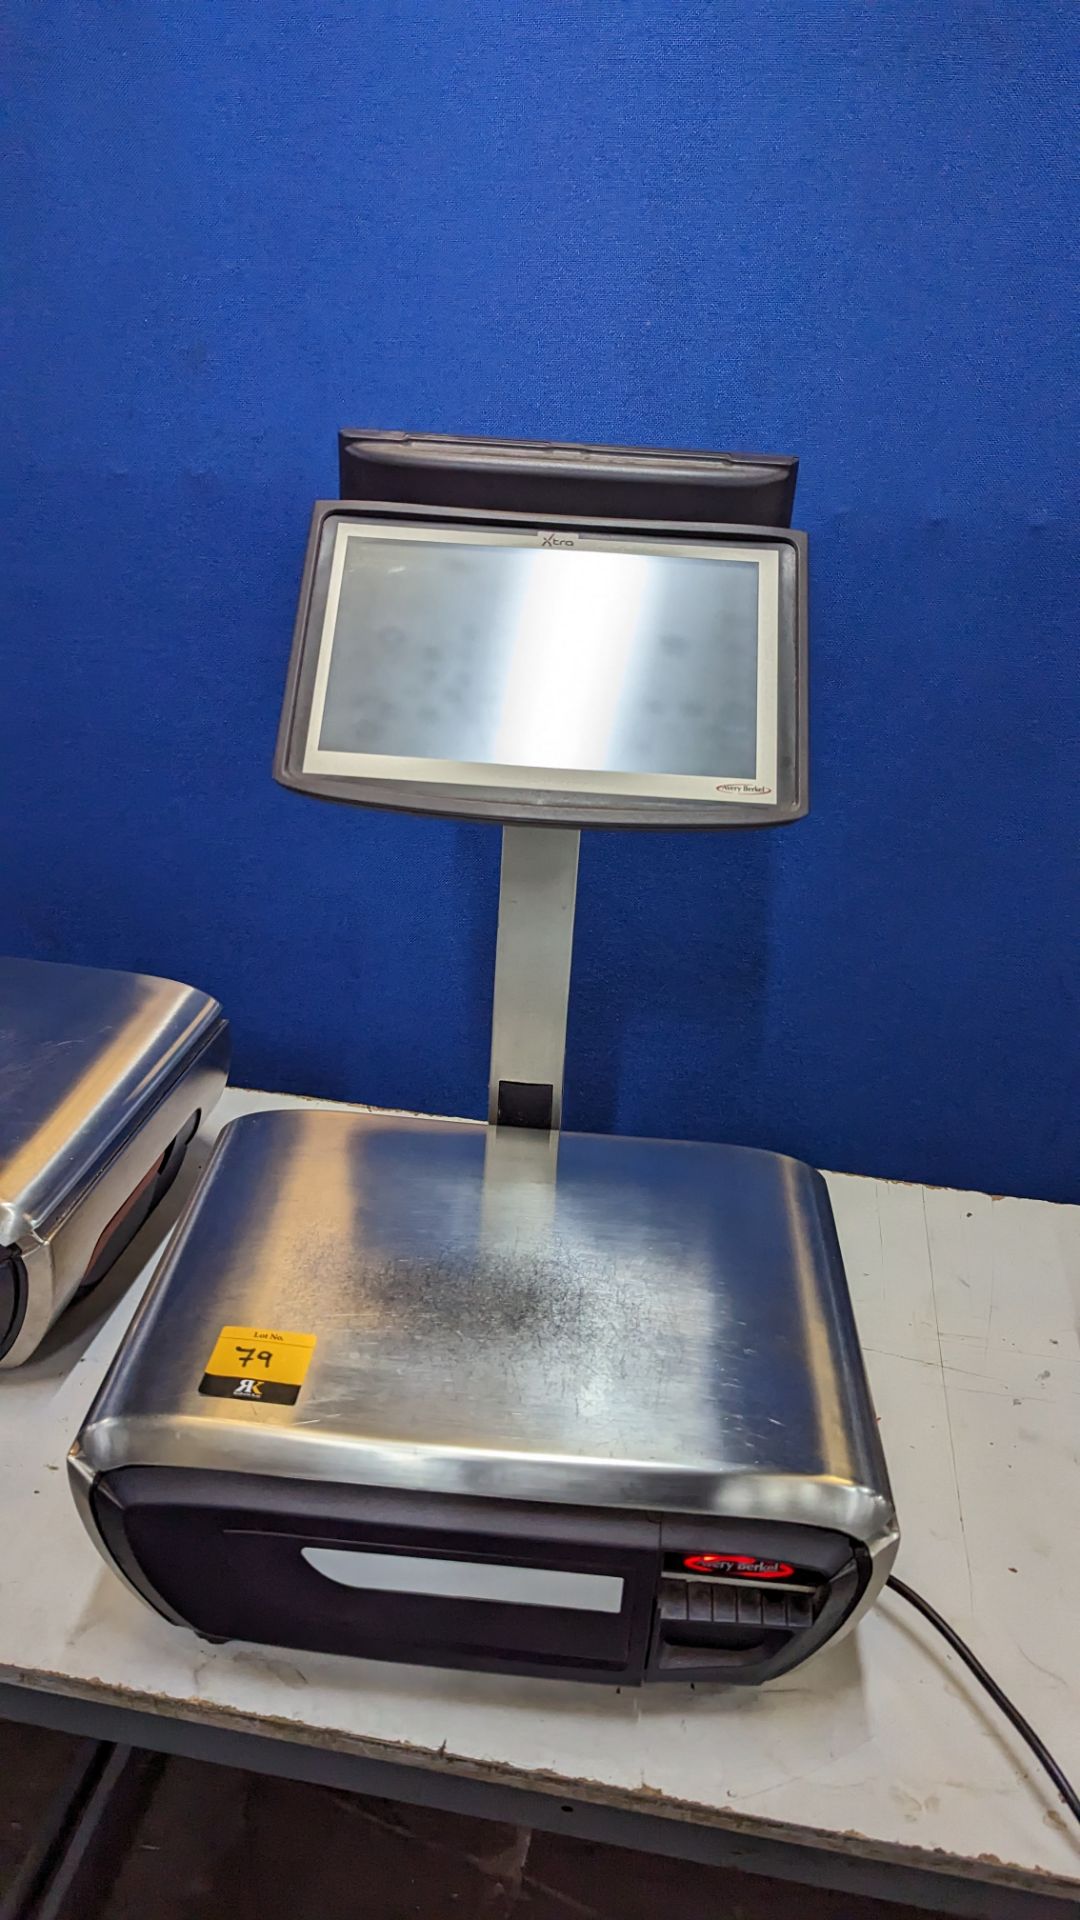 Avery Berkel Xti 400 Label & Receipt printing scale. 6kg/15kg capacity. These scales include a 10" - Image 2 of 17